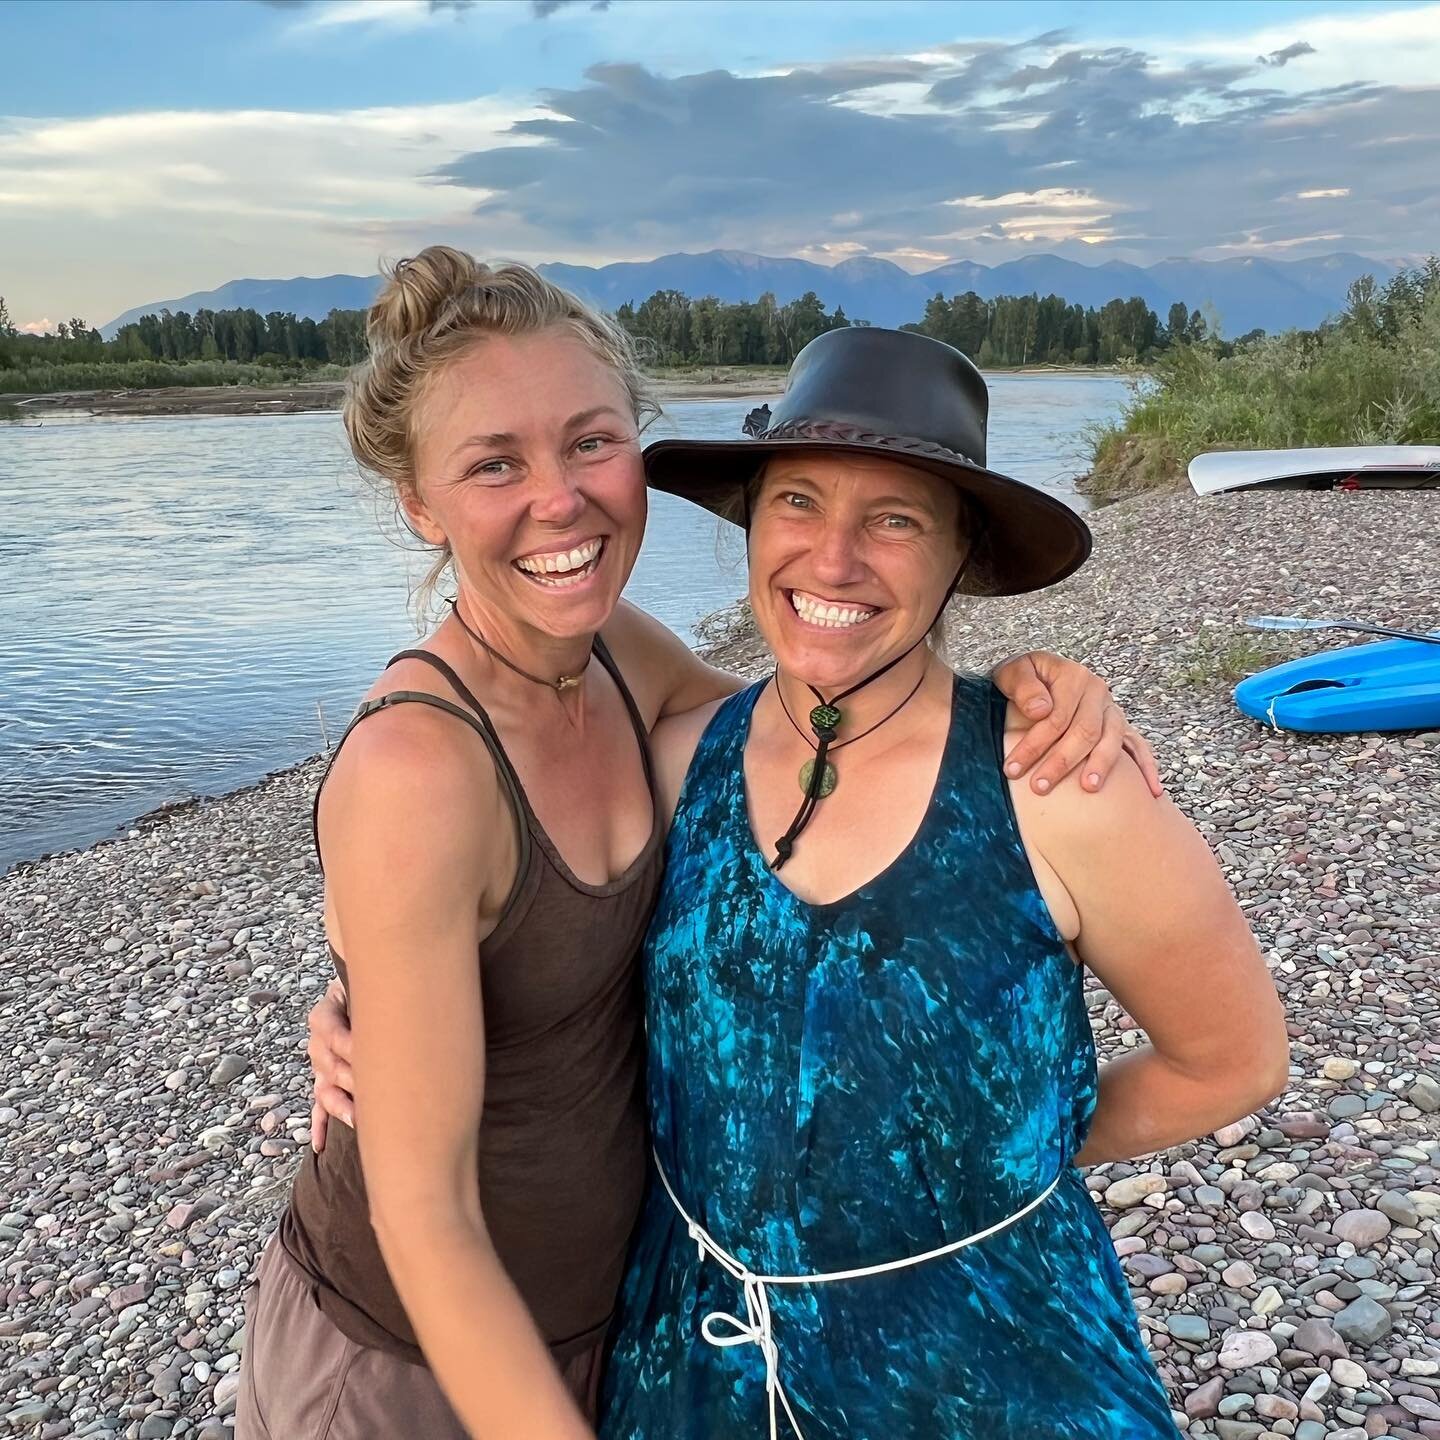 Join these crazy cooky wild women, Jessie Krebs and myself, Callie Russell, for
 
~ Wild Women on the Water ~

~ August 18 - 24th 

~ Kalispell, Montana

~ Registration opens this Saturday on Earth-day 4/22 at noon mountain time. 

~ Check out Caprak